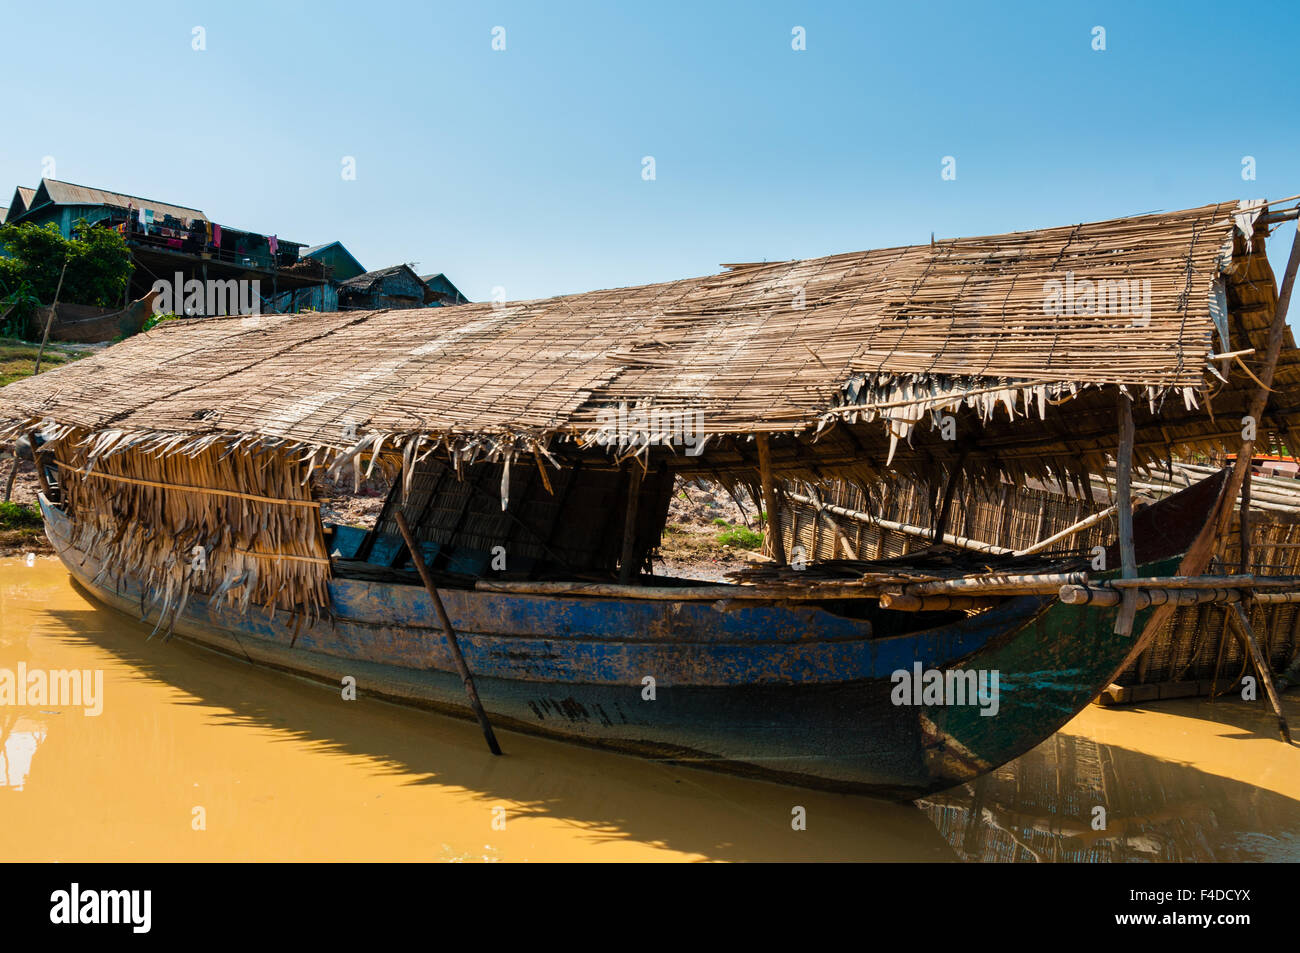 Wooden boat on muddy river Stock Photo